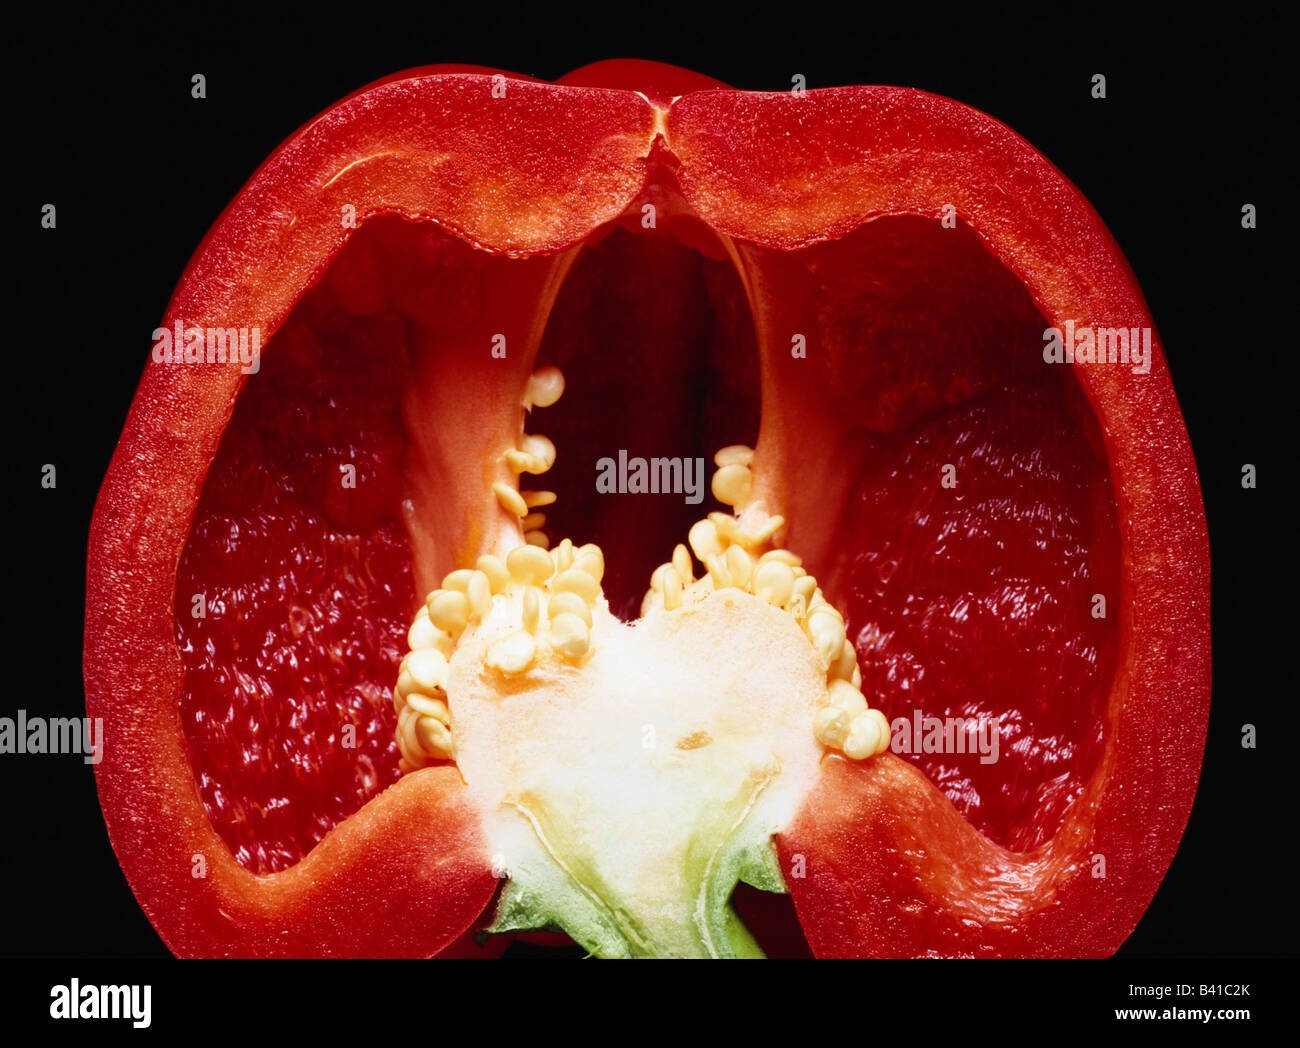 botany, vegetable, sweet pepper, (Capsicum), red, halved, cross section, close-up, close up, Solanaceae, Stock Photo